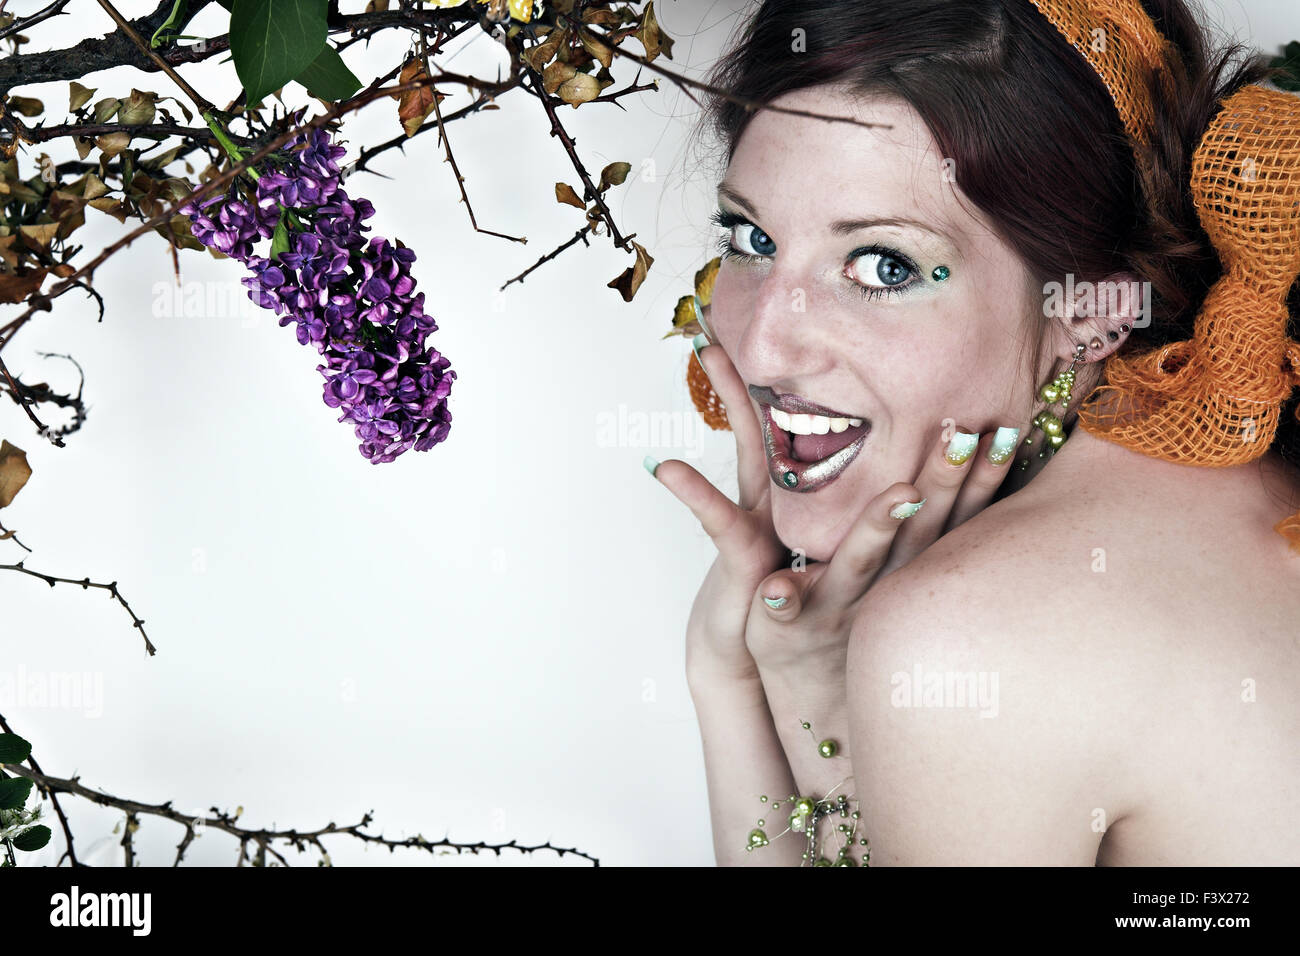 Shrill young woman with flowers Stock Photo